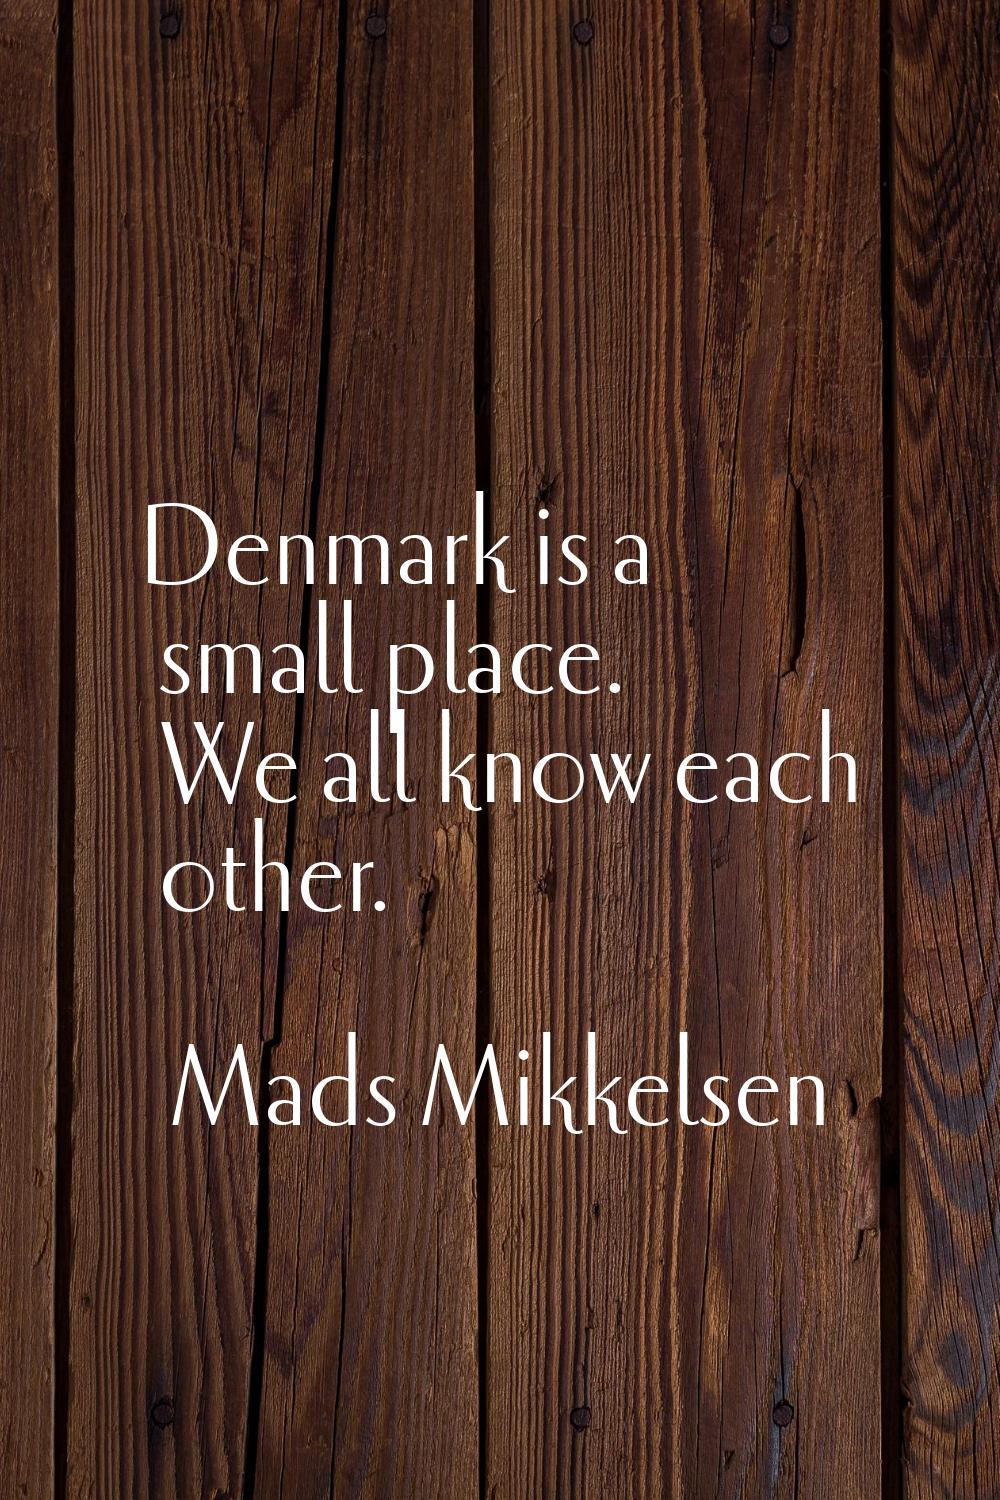 Denmark is a small place. We all know each other.